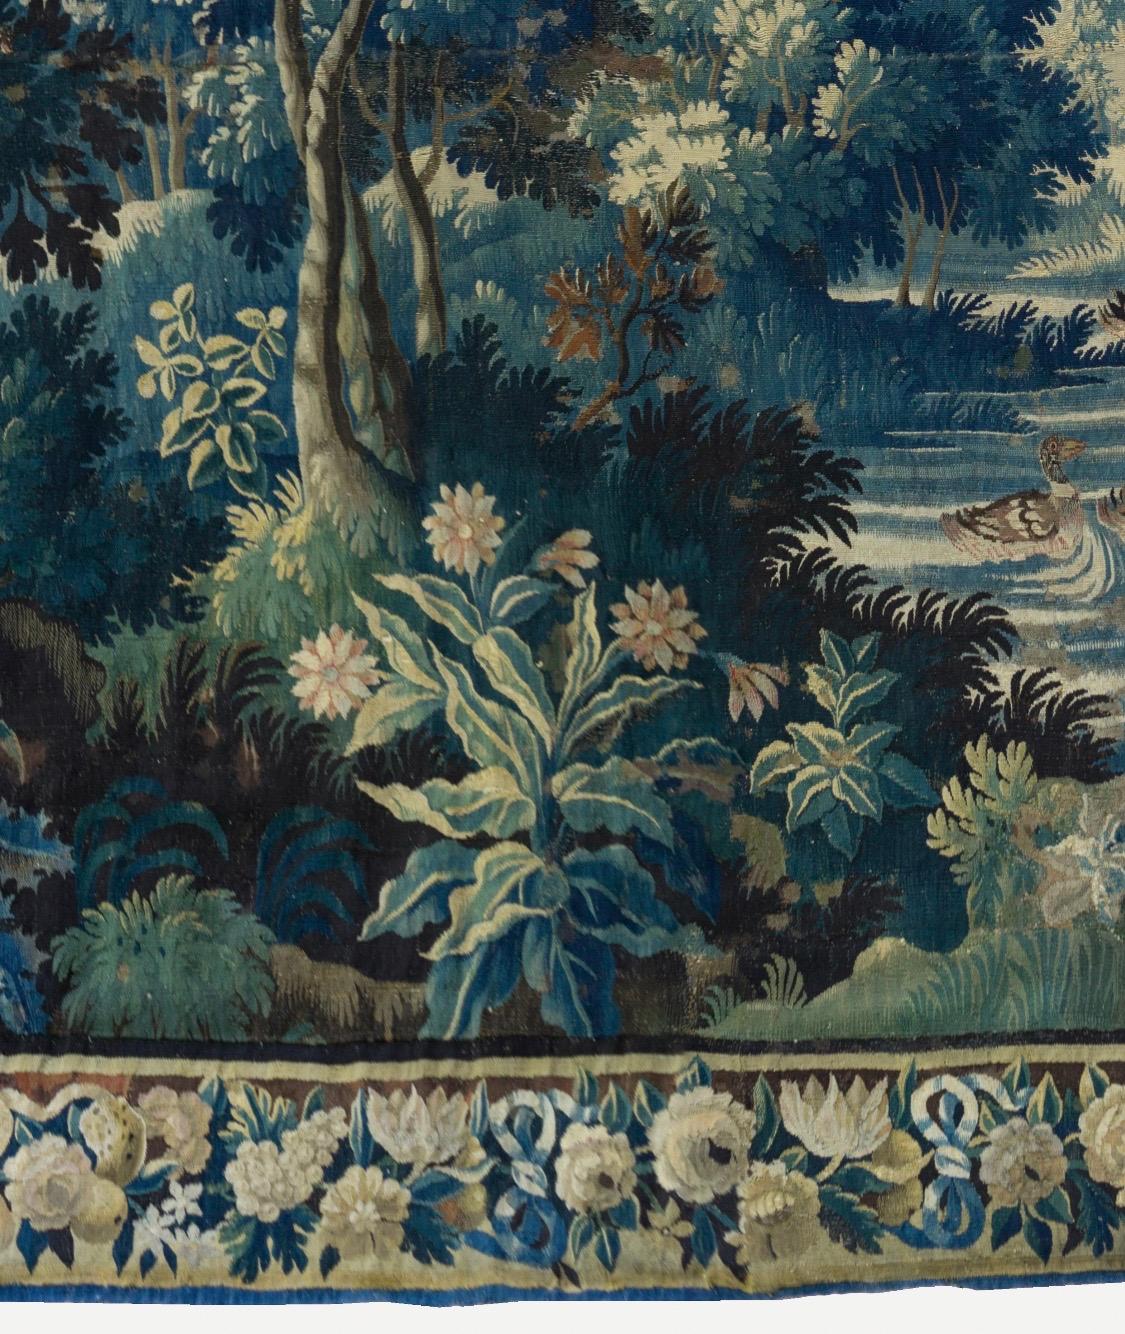 Hand-Woven Antique Square 17th Century Flemish Verdure Landscape Tapestry with Birds